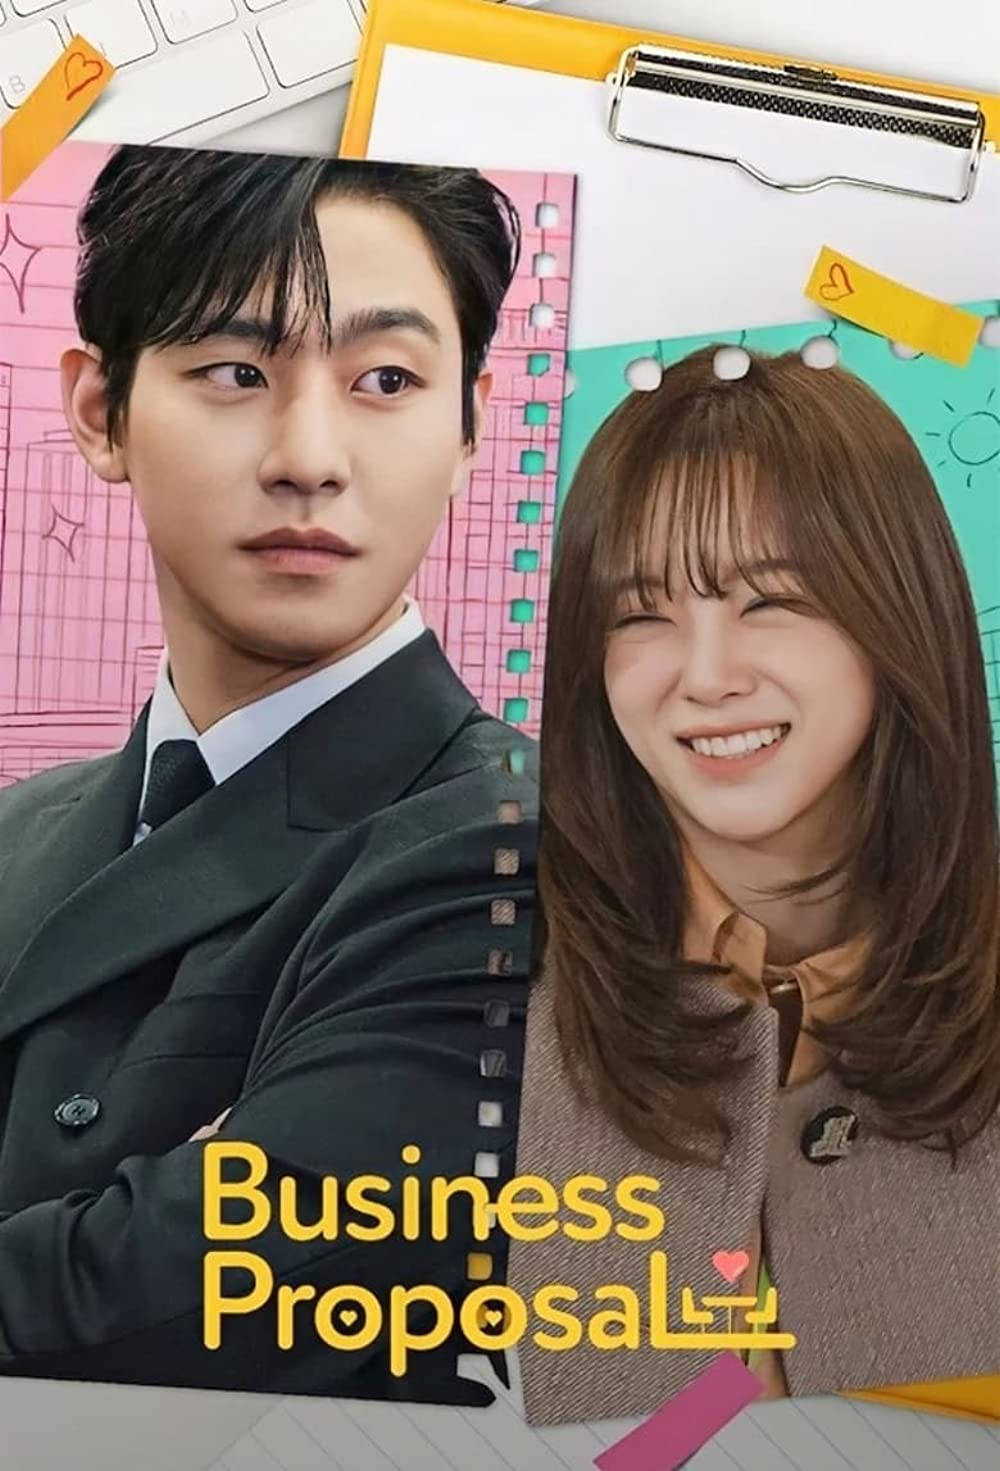 Business proposal drama poster in high resolution Wallpaper